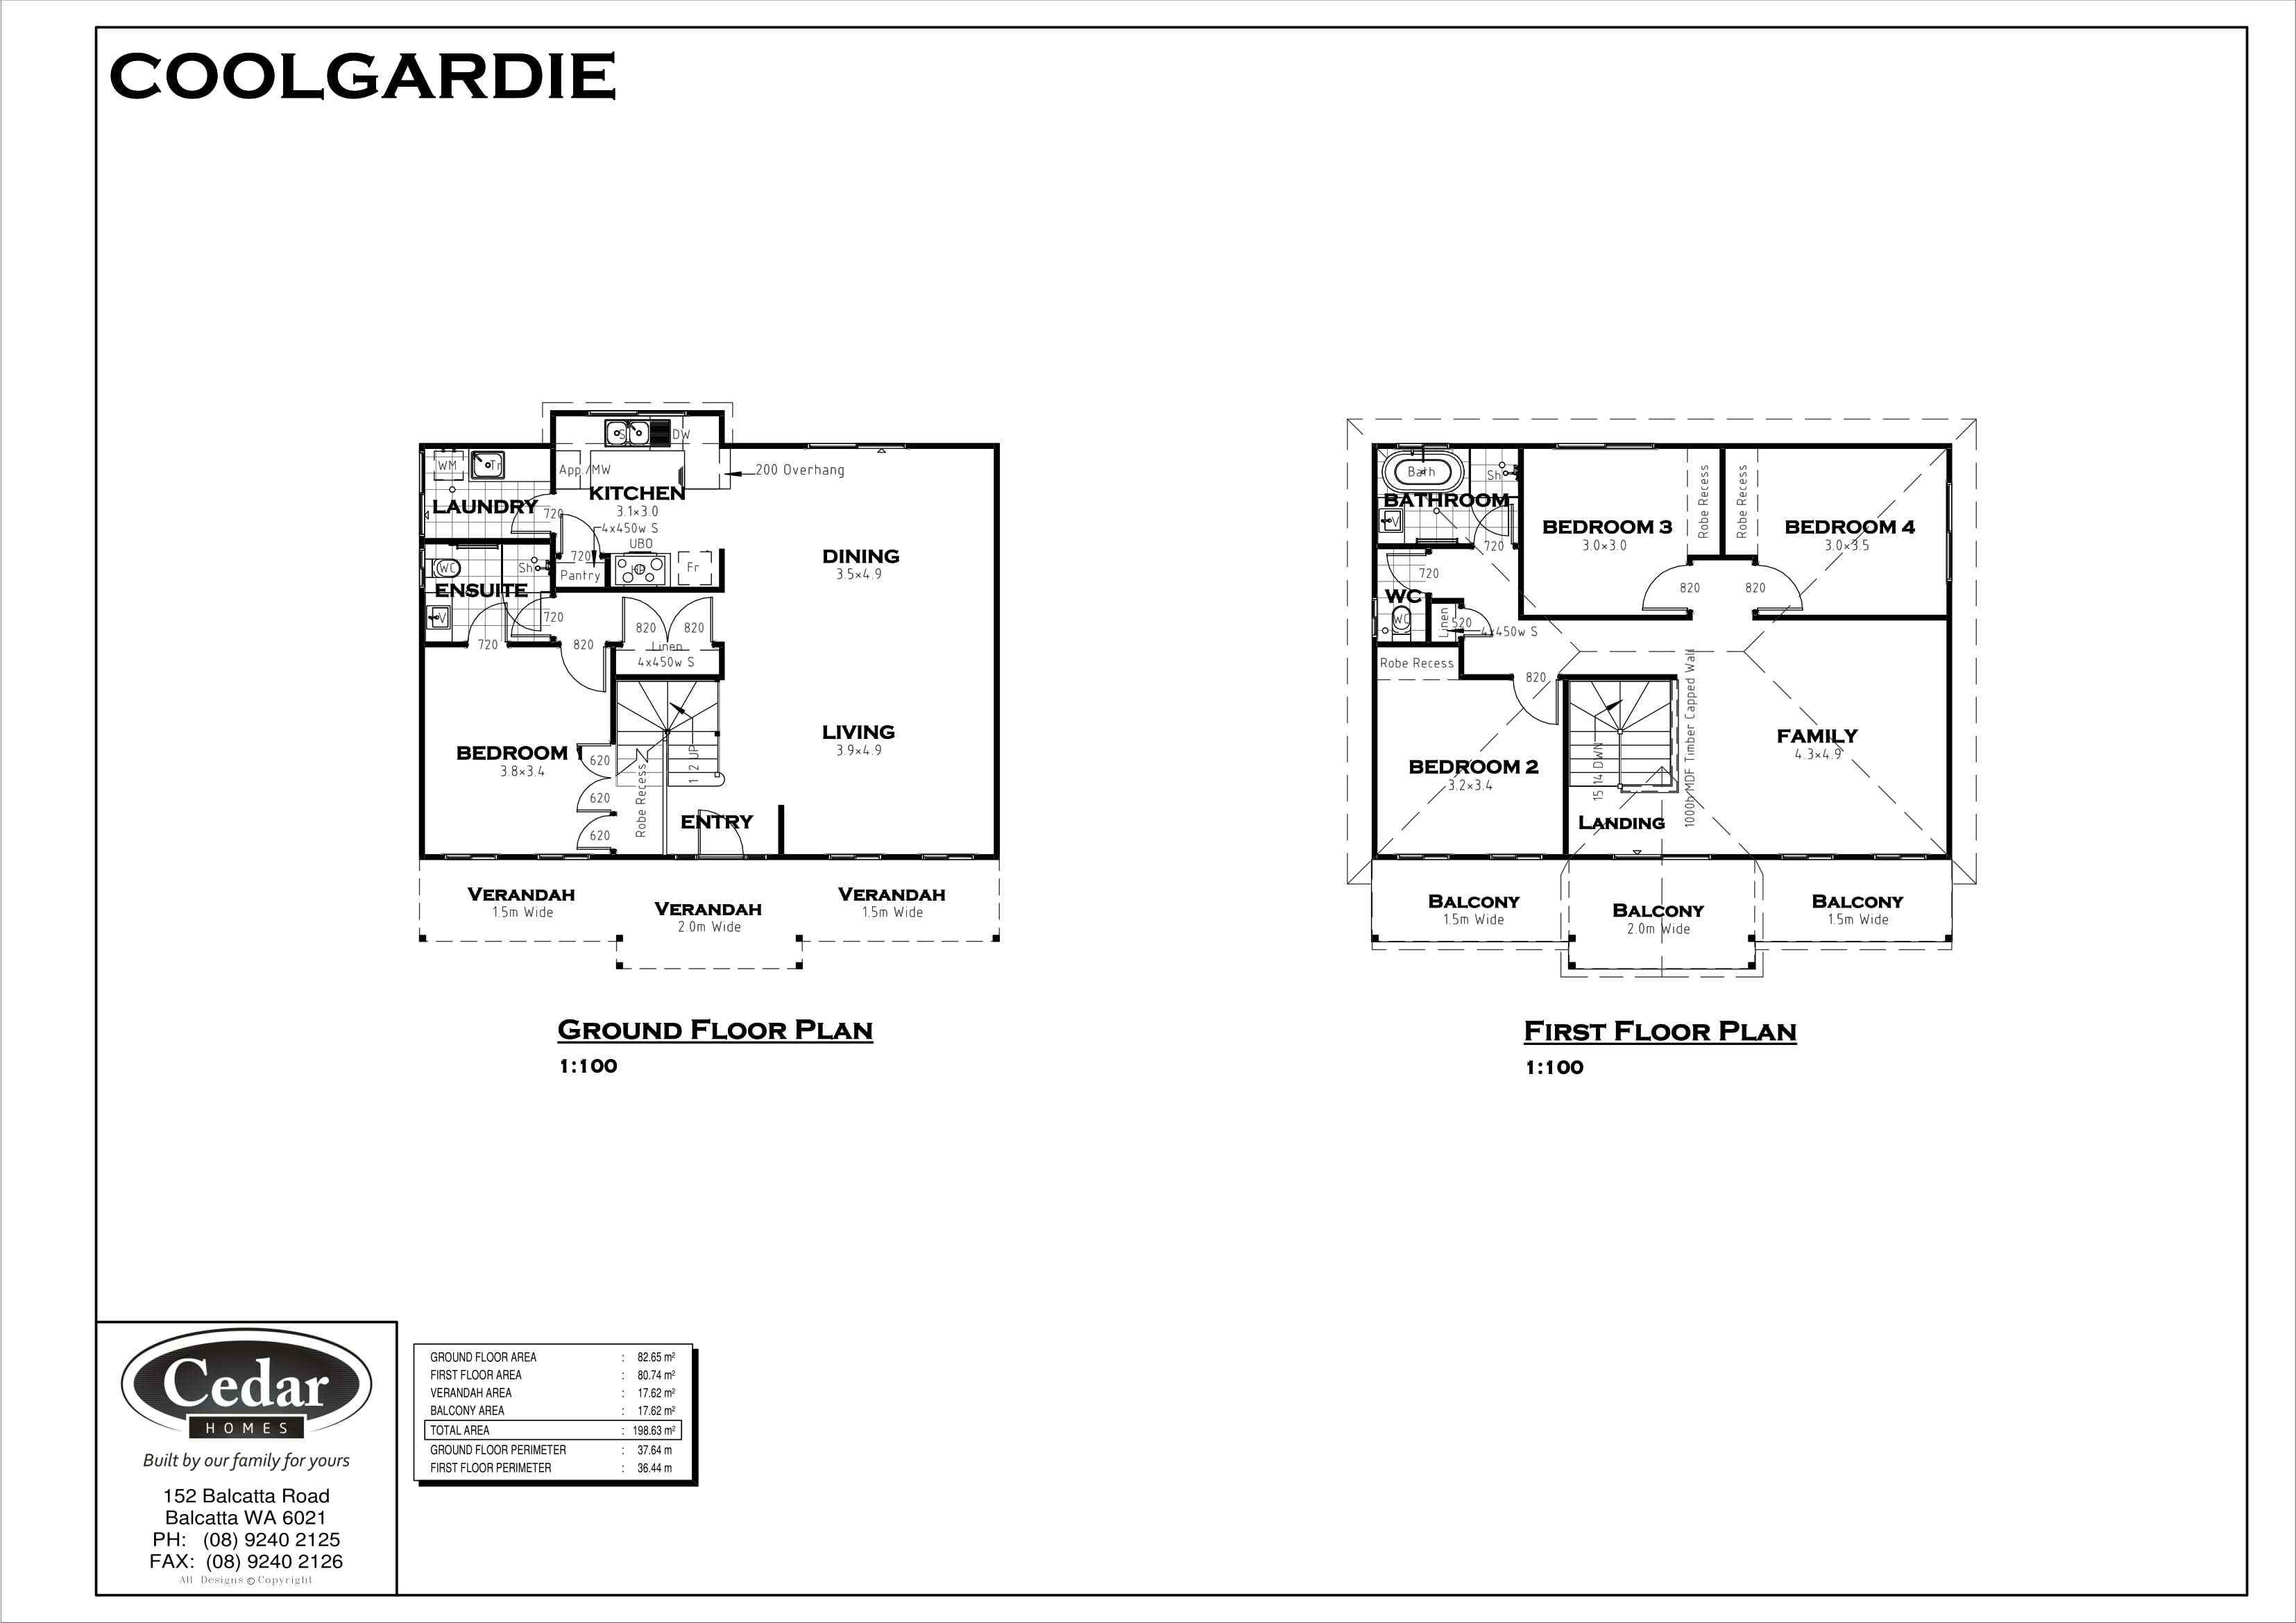 Coolgardie style house floor plan against a whit background